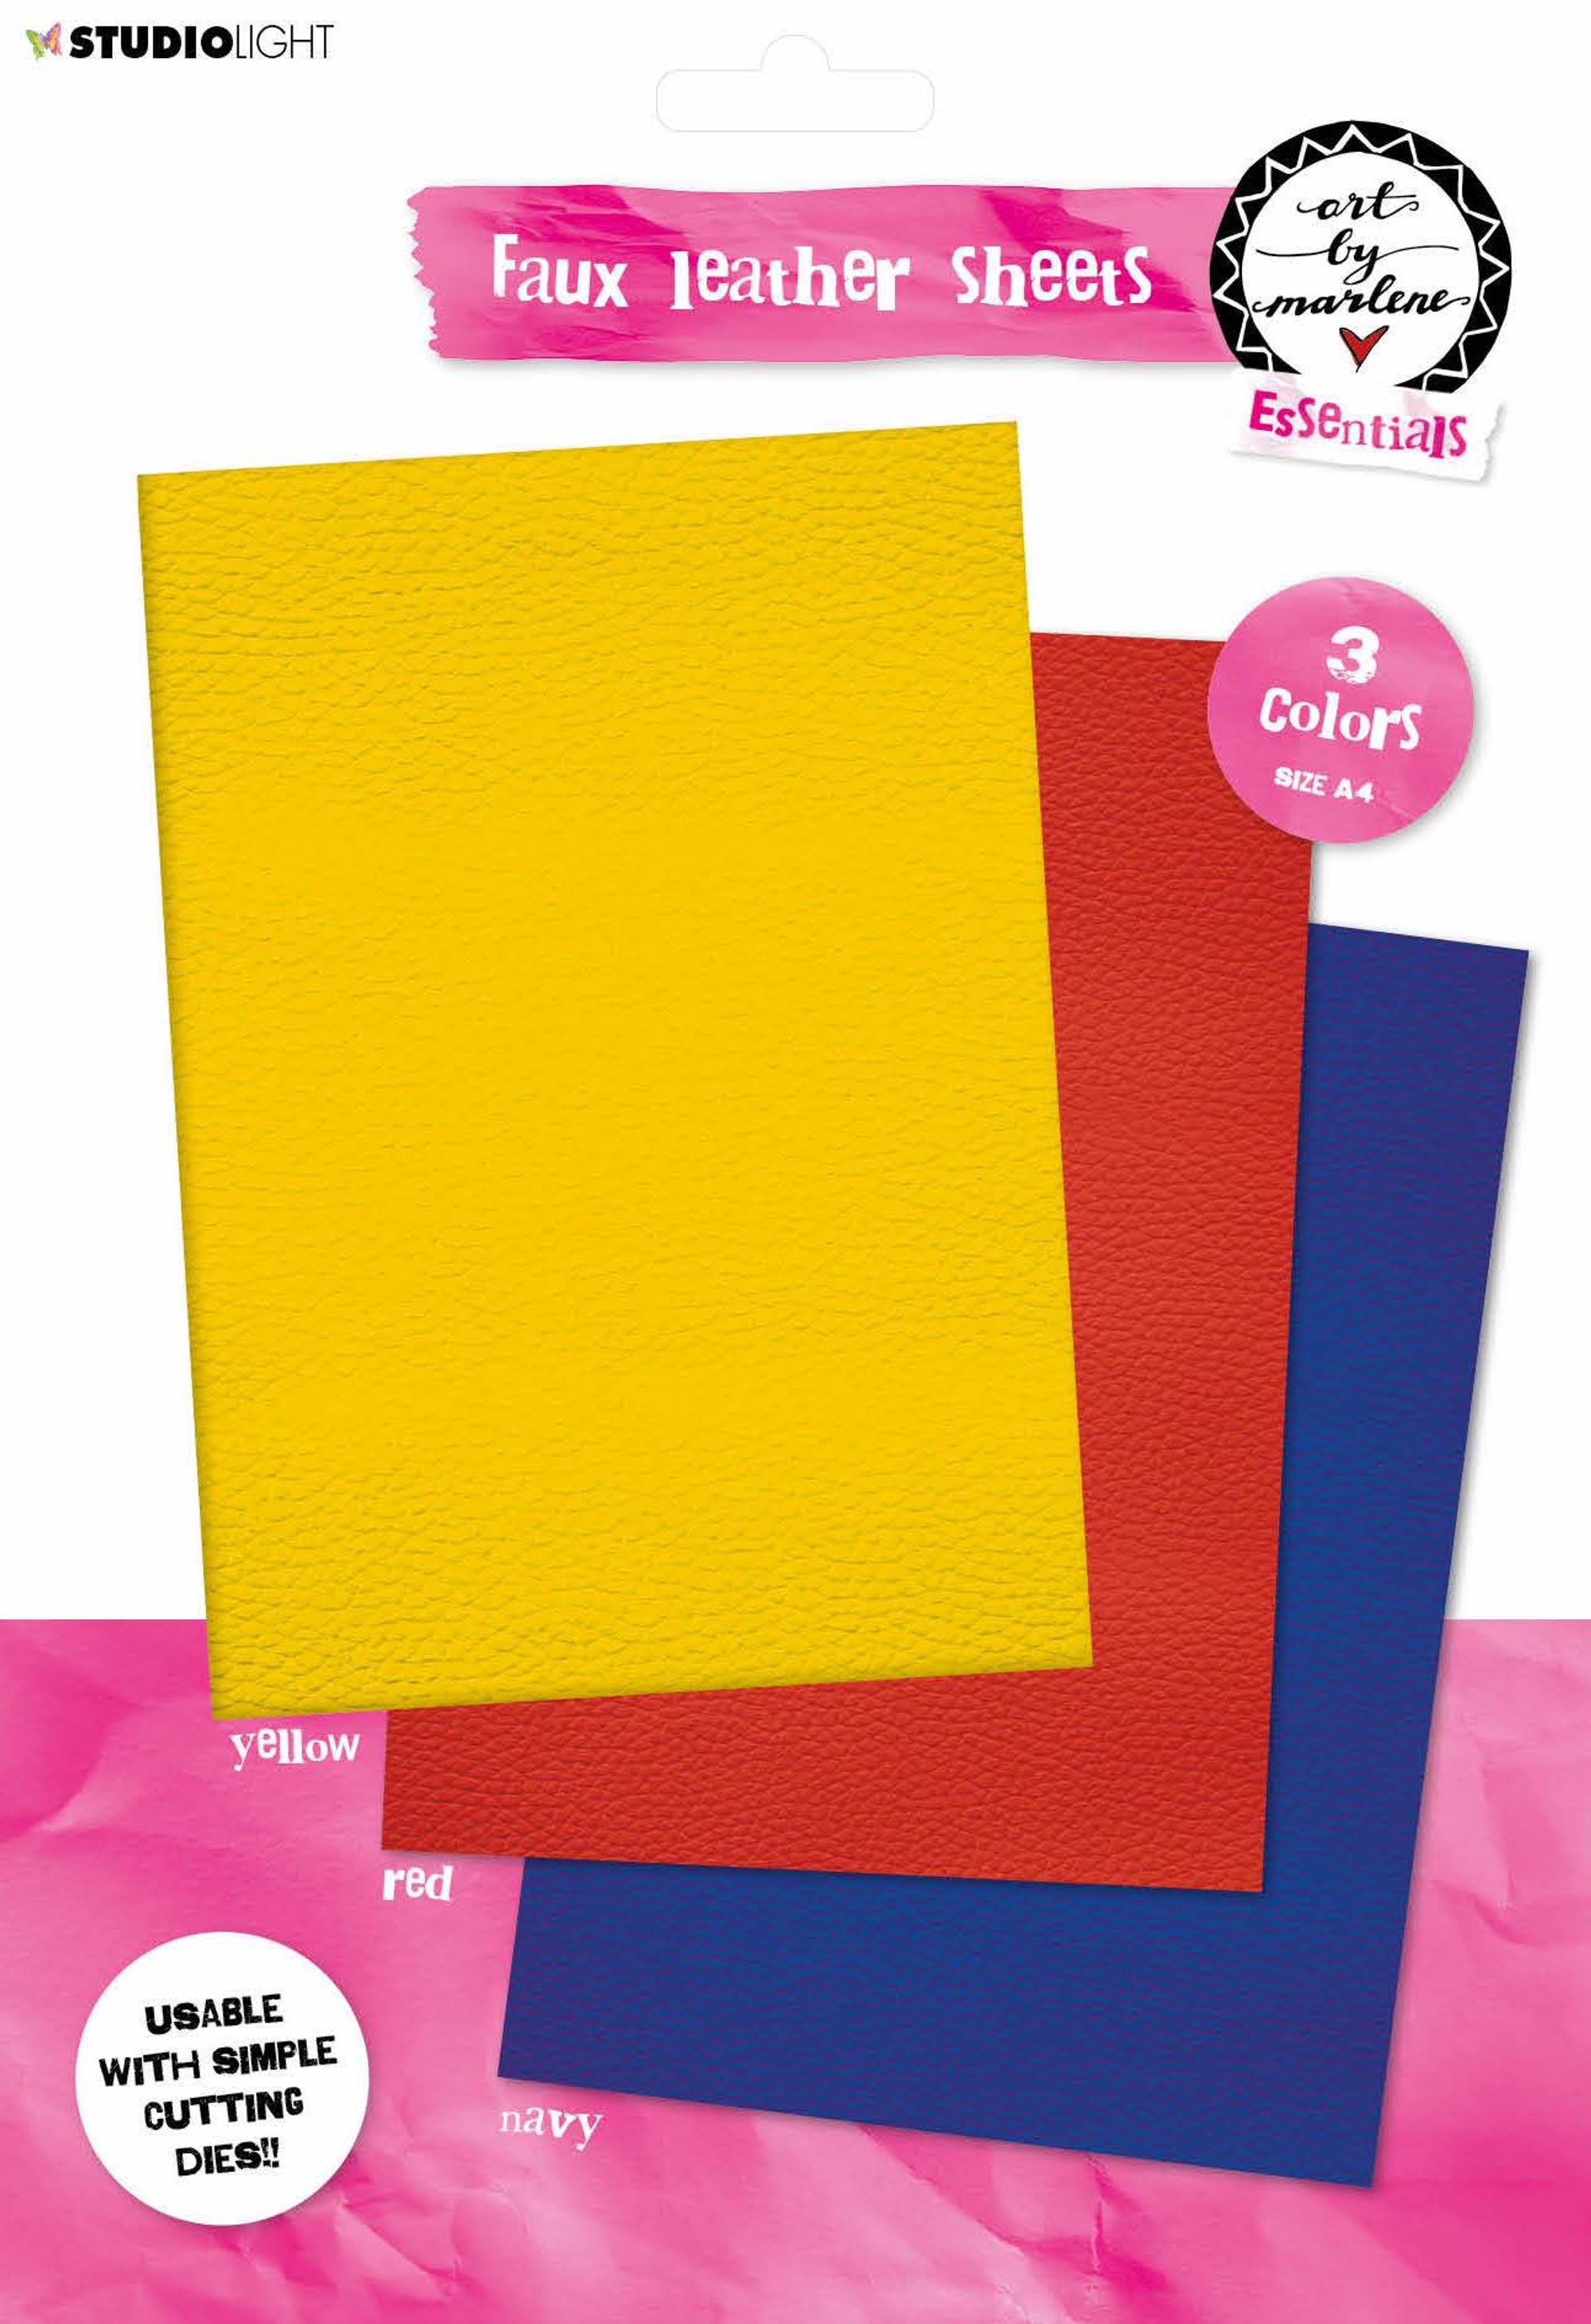 Art By Marlene Faux Leather Sheets Yellow/Red/Blue 210x297mm 3 SH nr.02